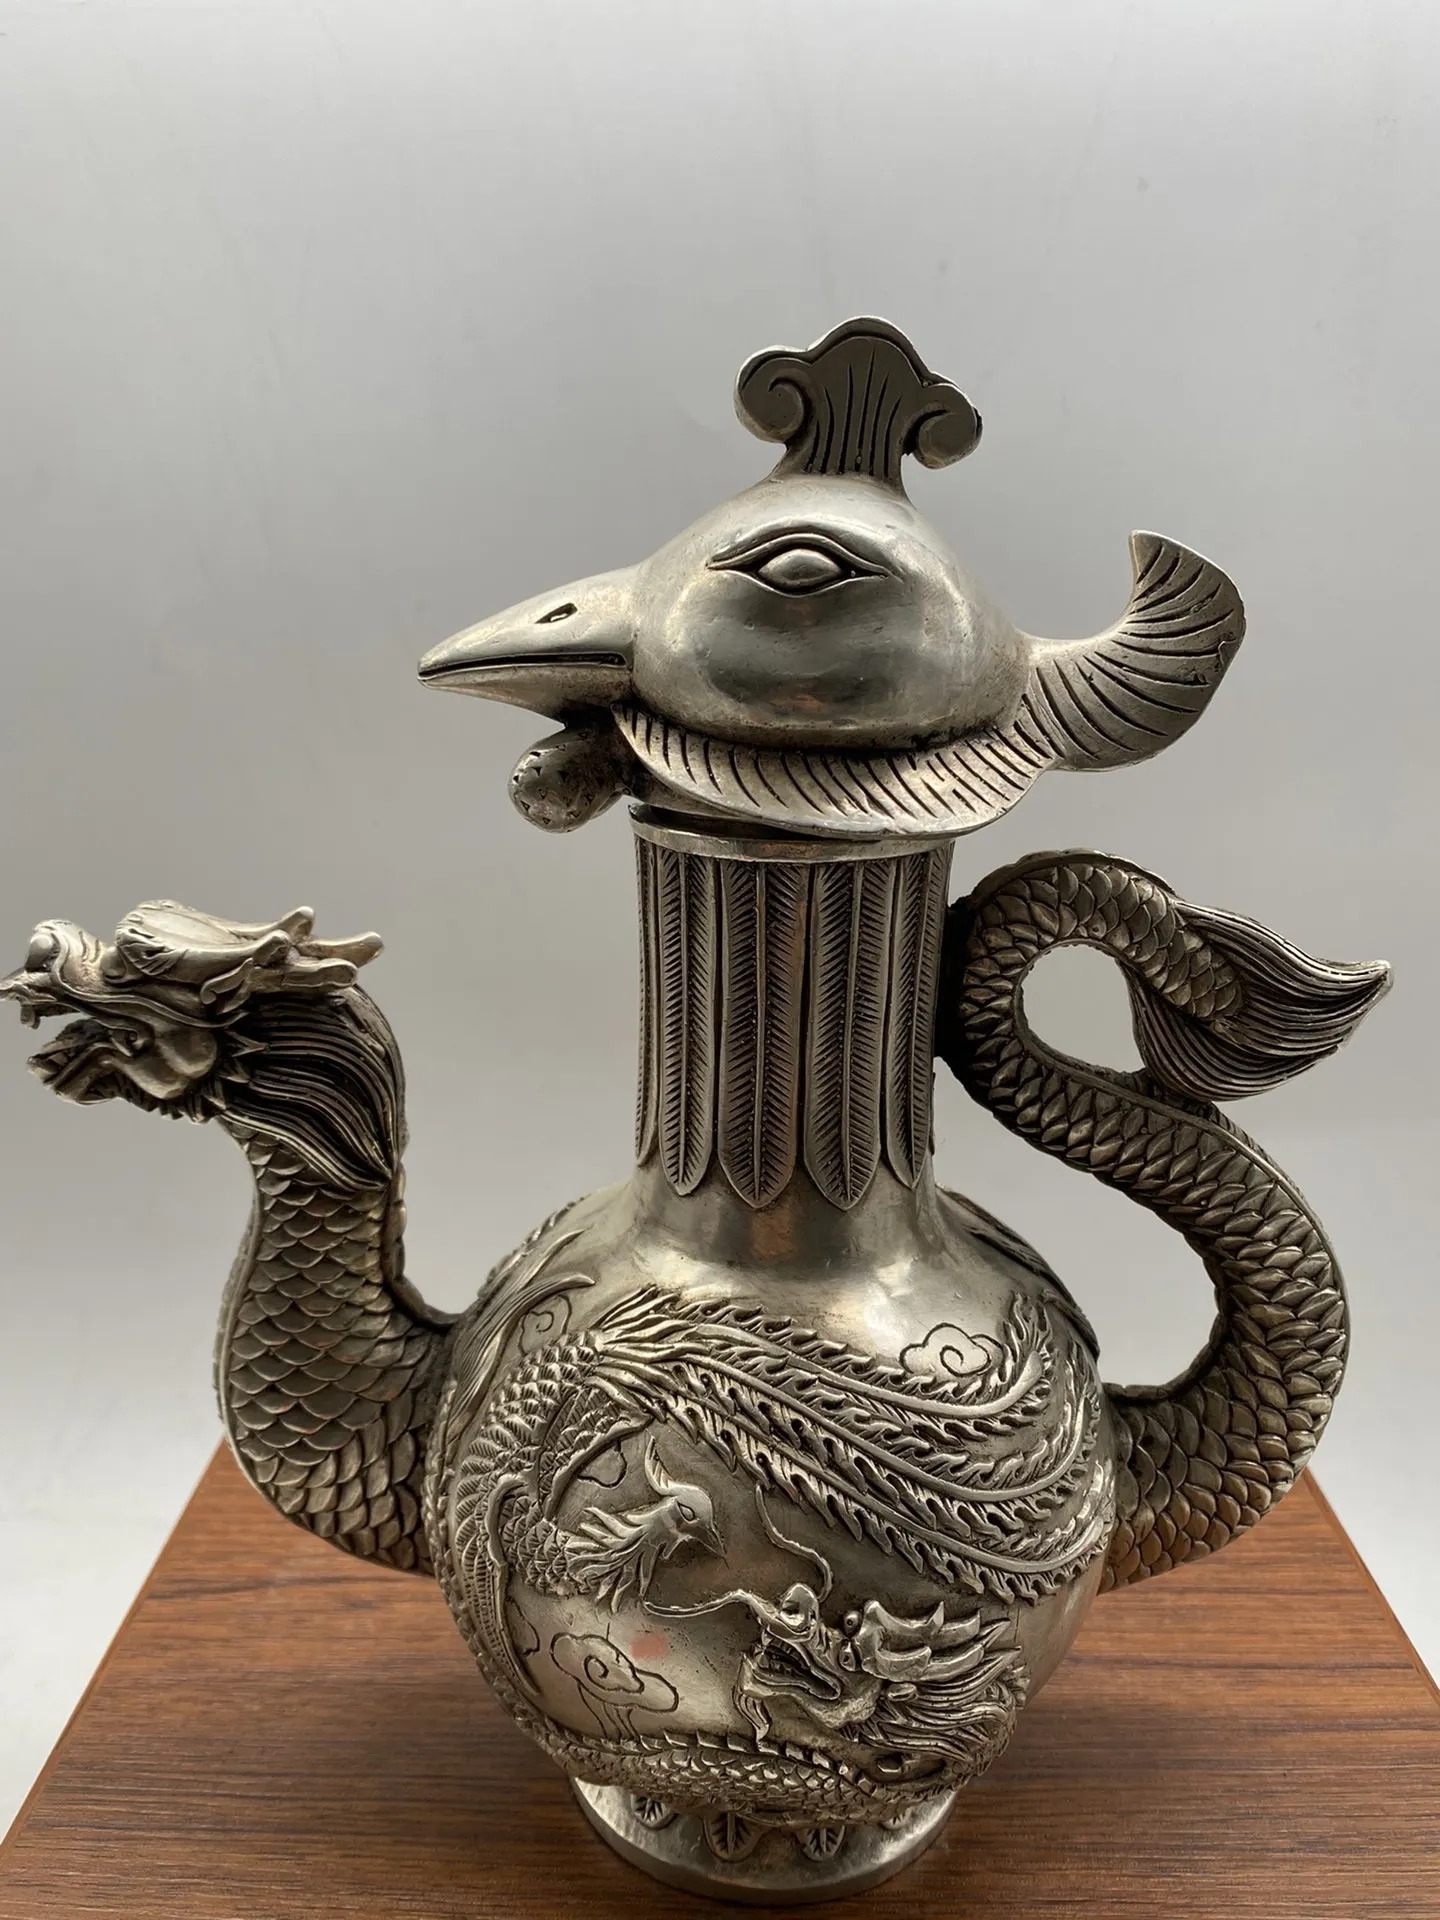 

China ancient Tibet silver Dragon body and phoenix head decoration kettle wine pot teapot flagon metal crafts home decoration